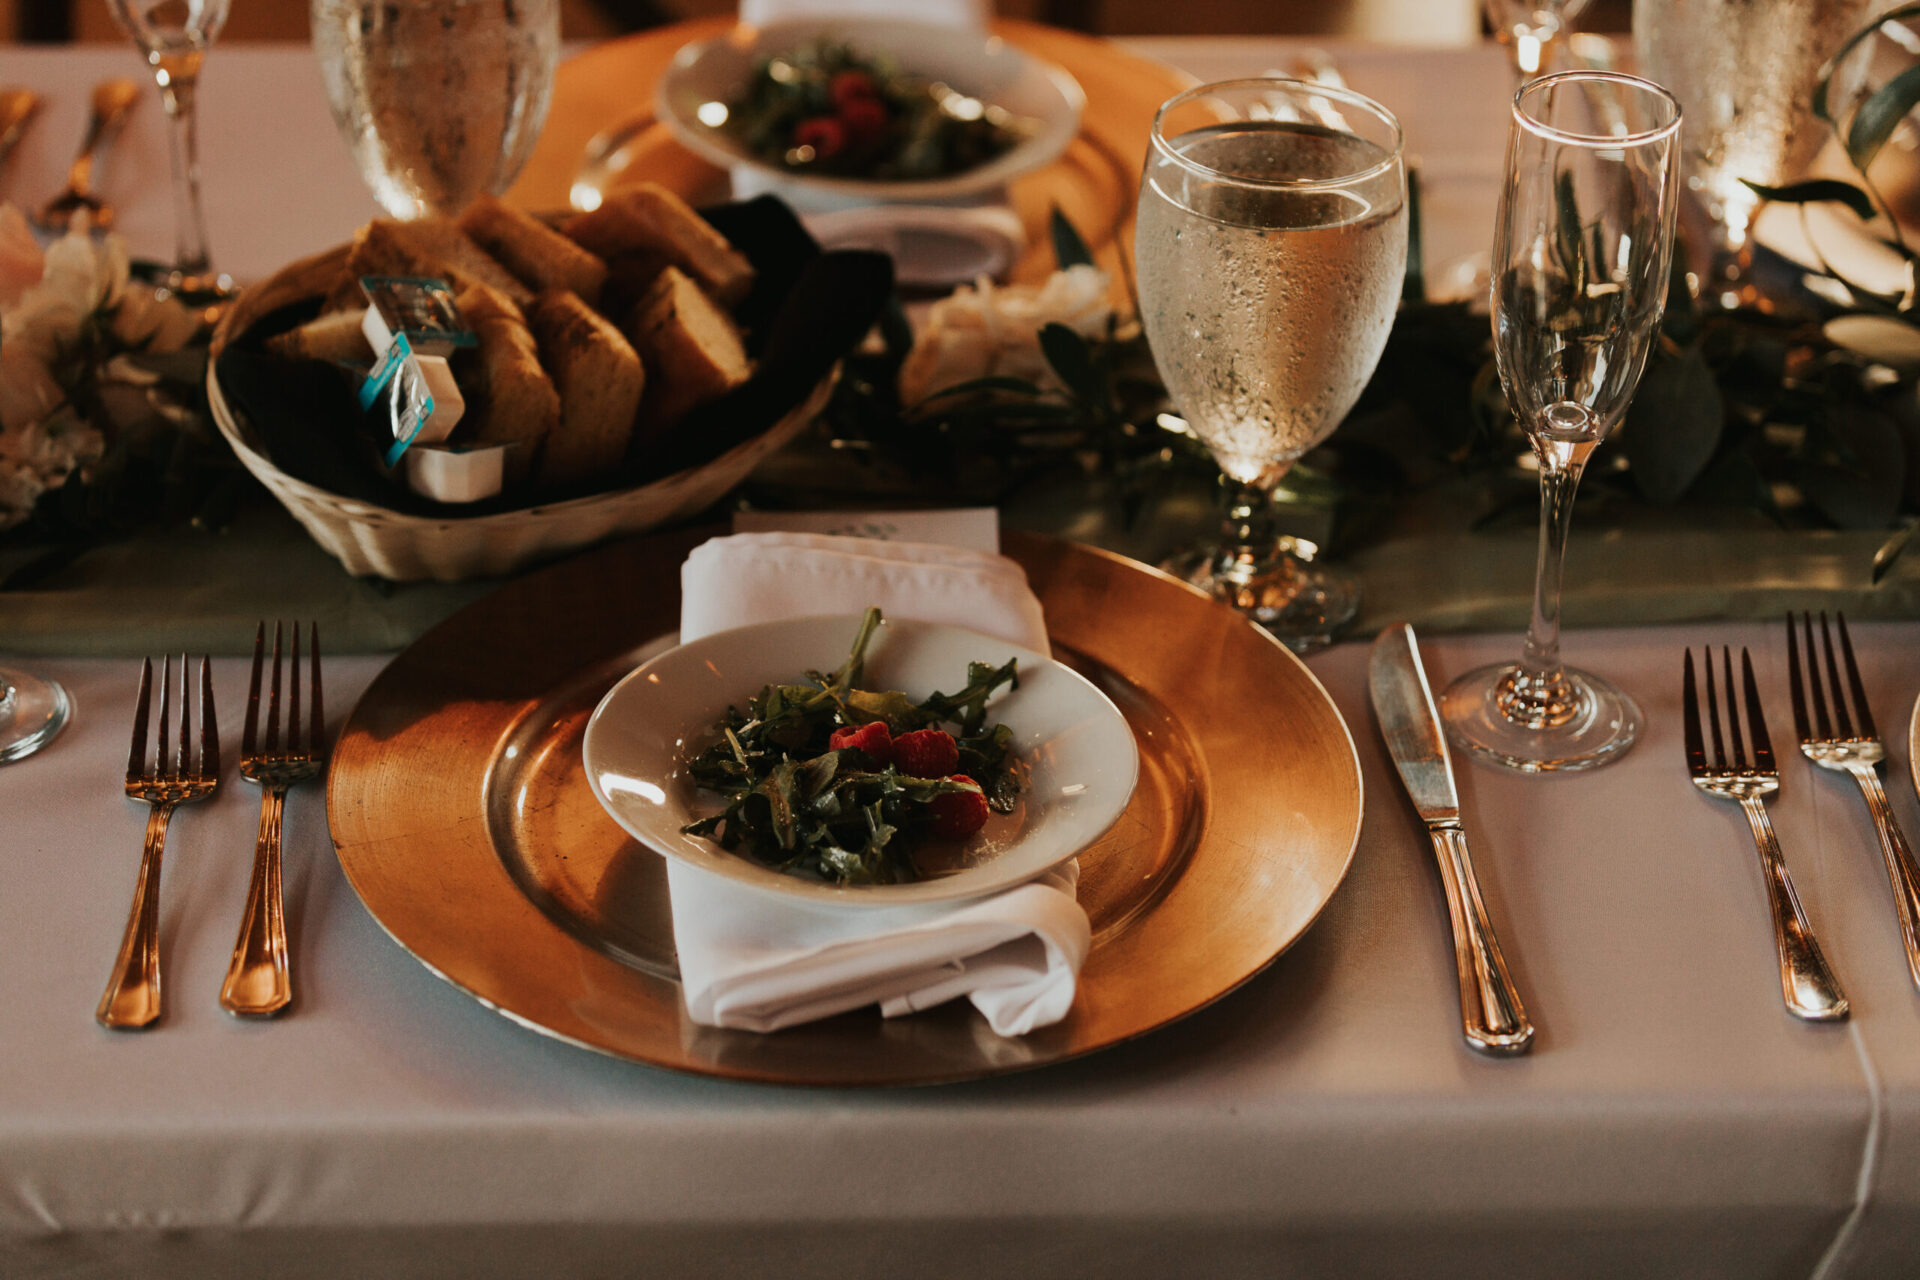 Zion Springs reception dinner with gold platter and table setting, cold ice water, champagne flute, bread basket